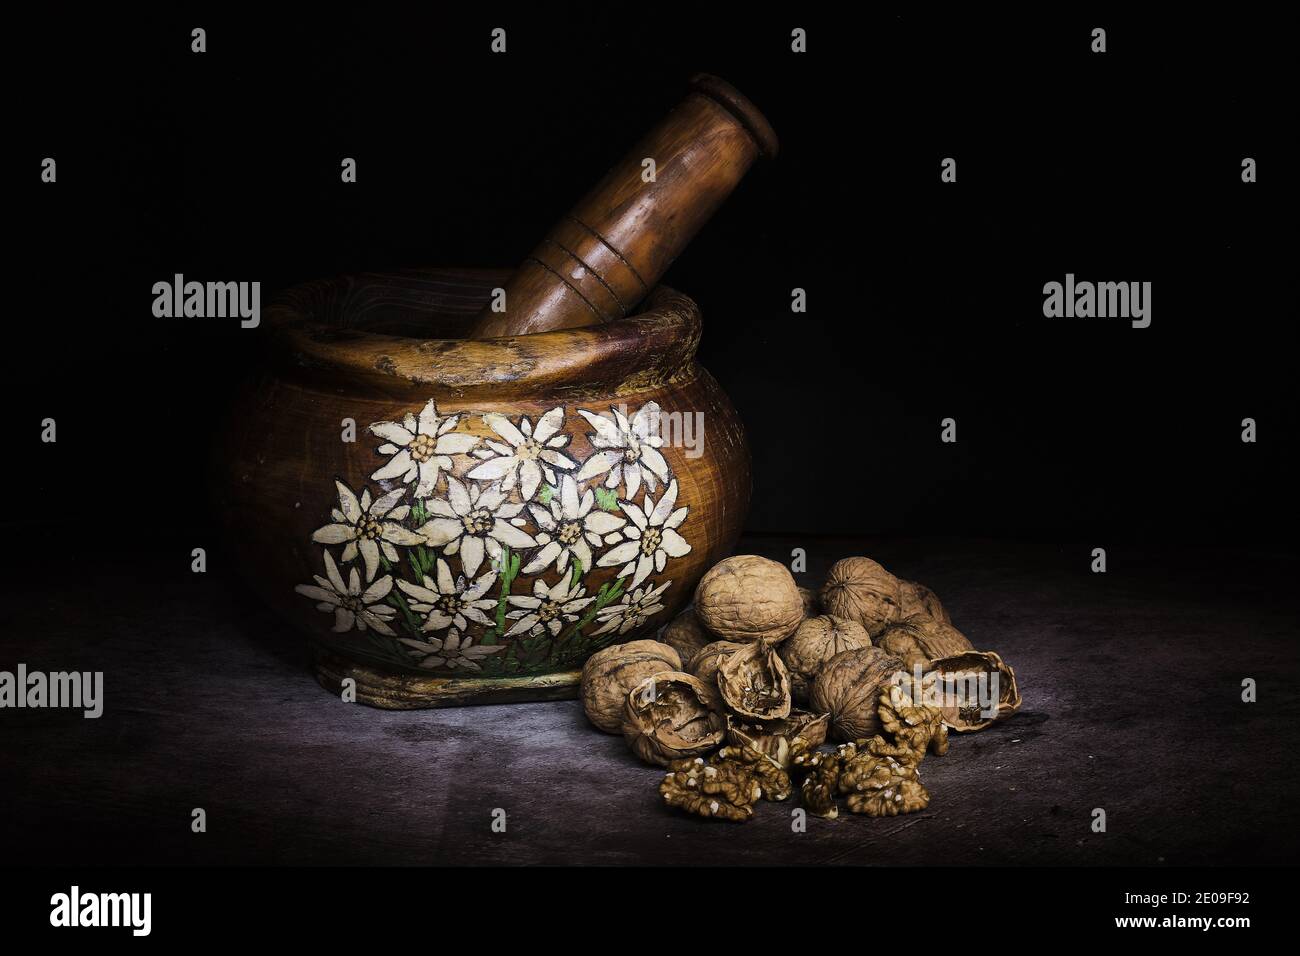 handmade wooden mortar with alpine decorations and nuts to beat Stock Photo